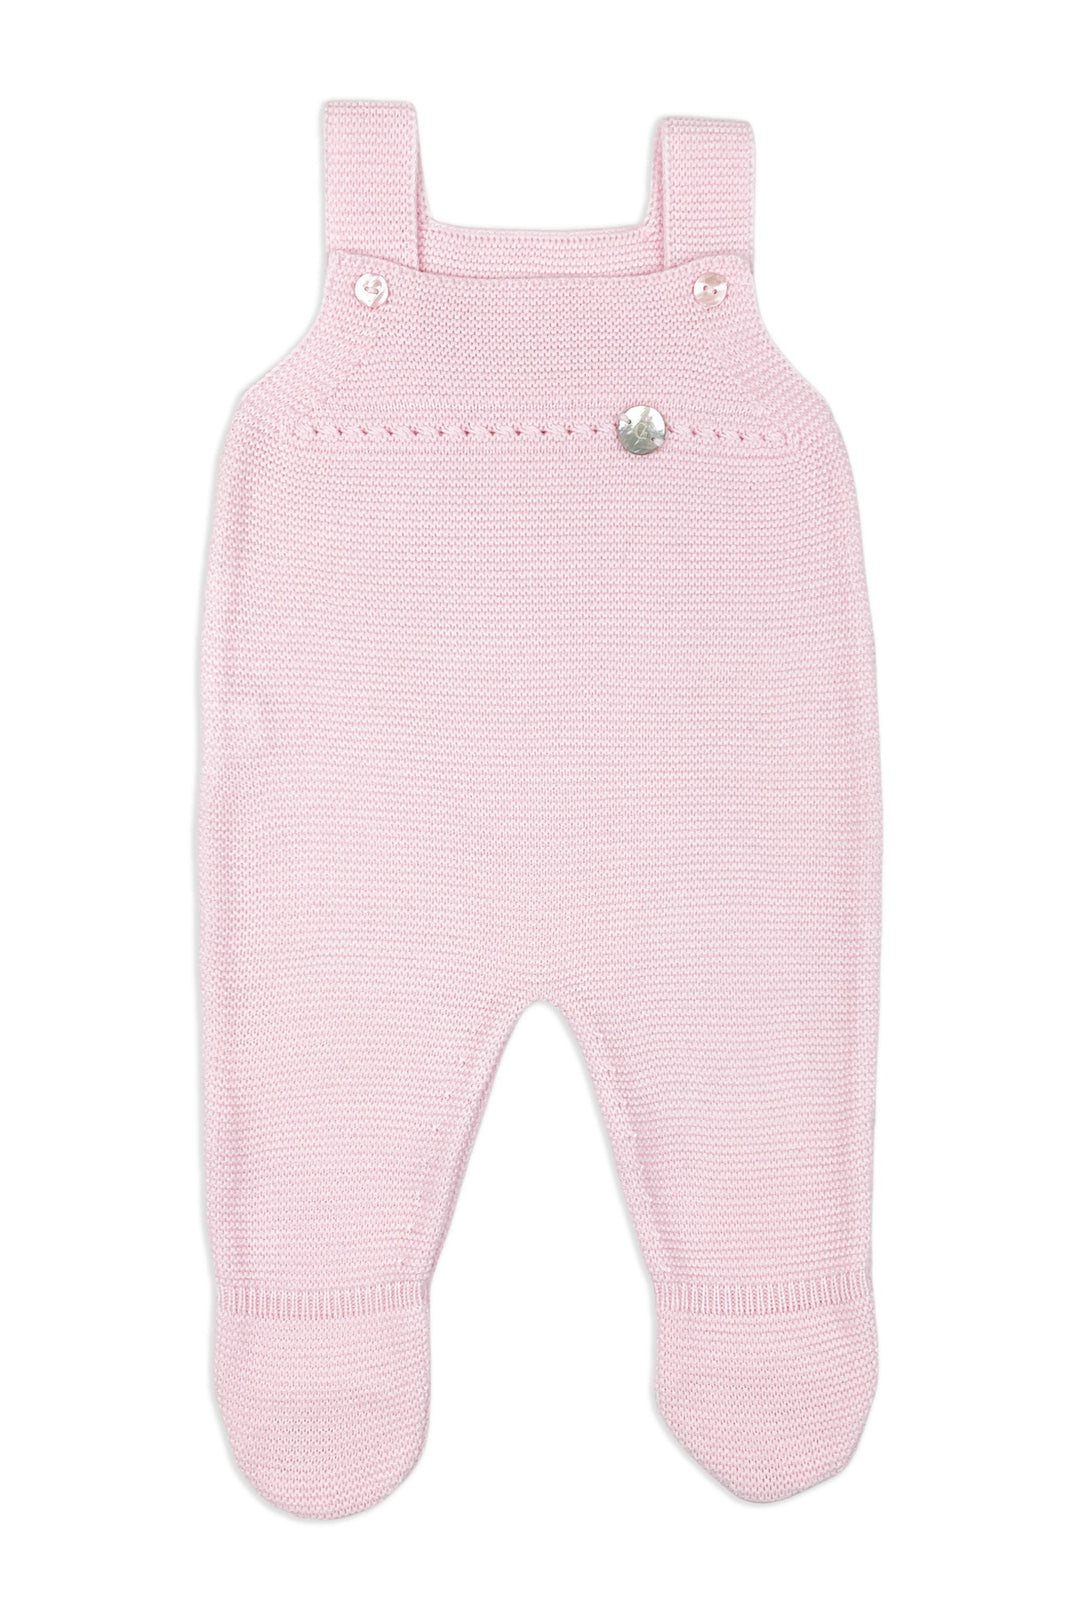 Granlei "Rowen" Baby Pink Knitted Dungarees | Millie and John